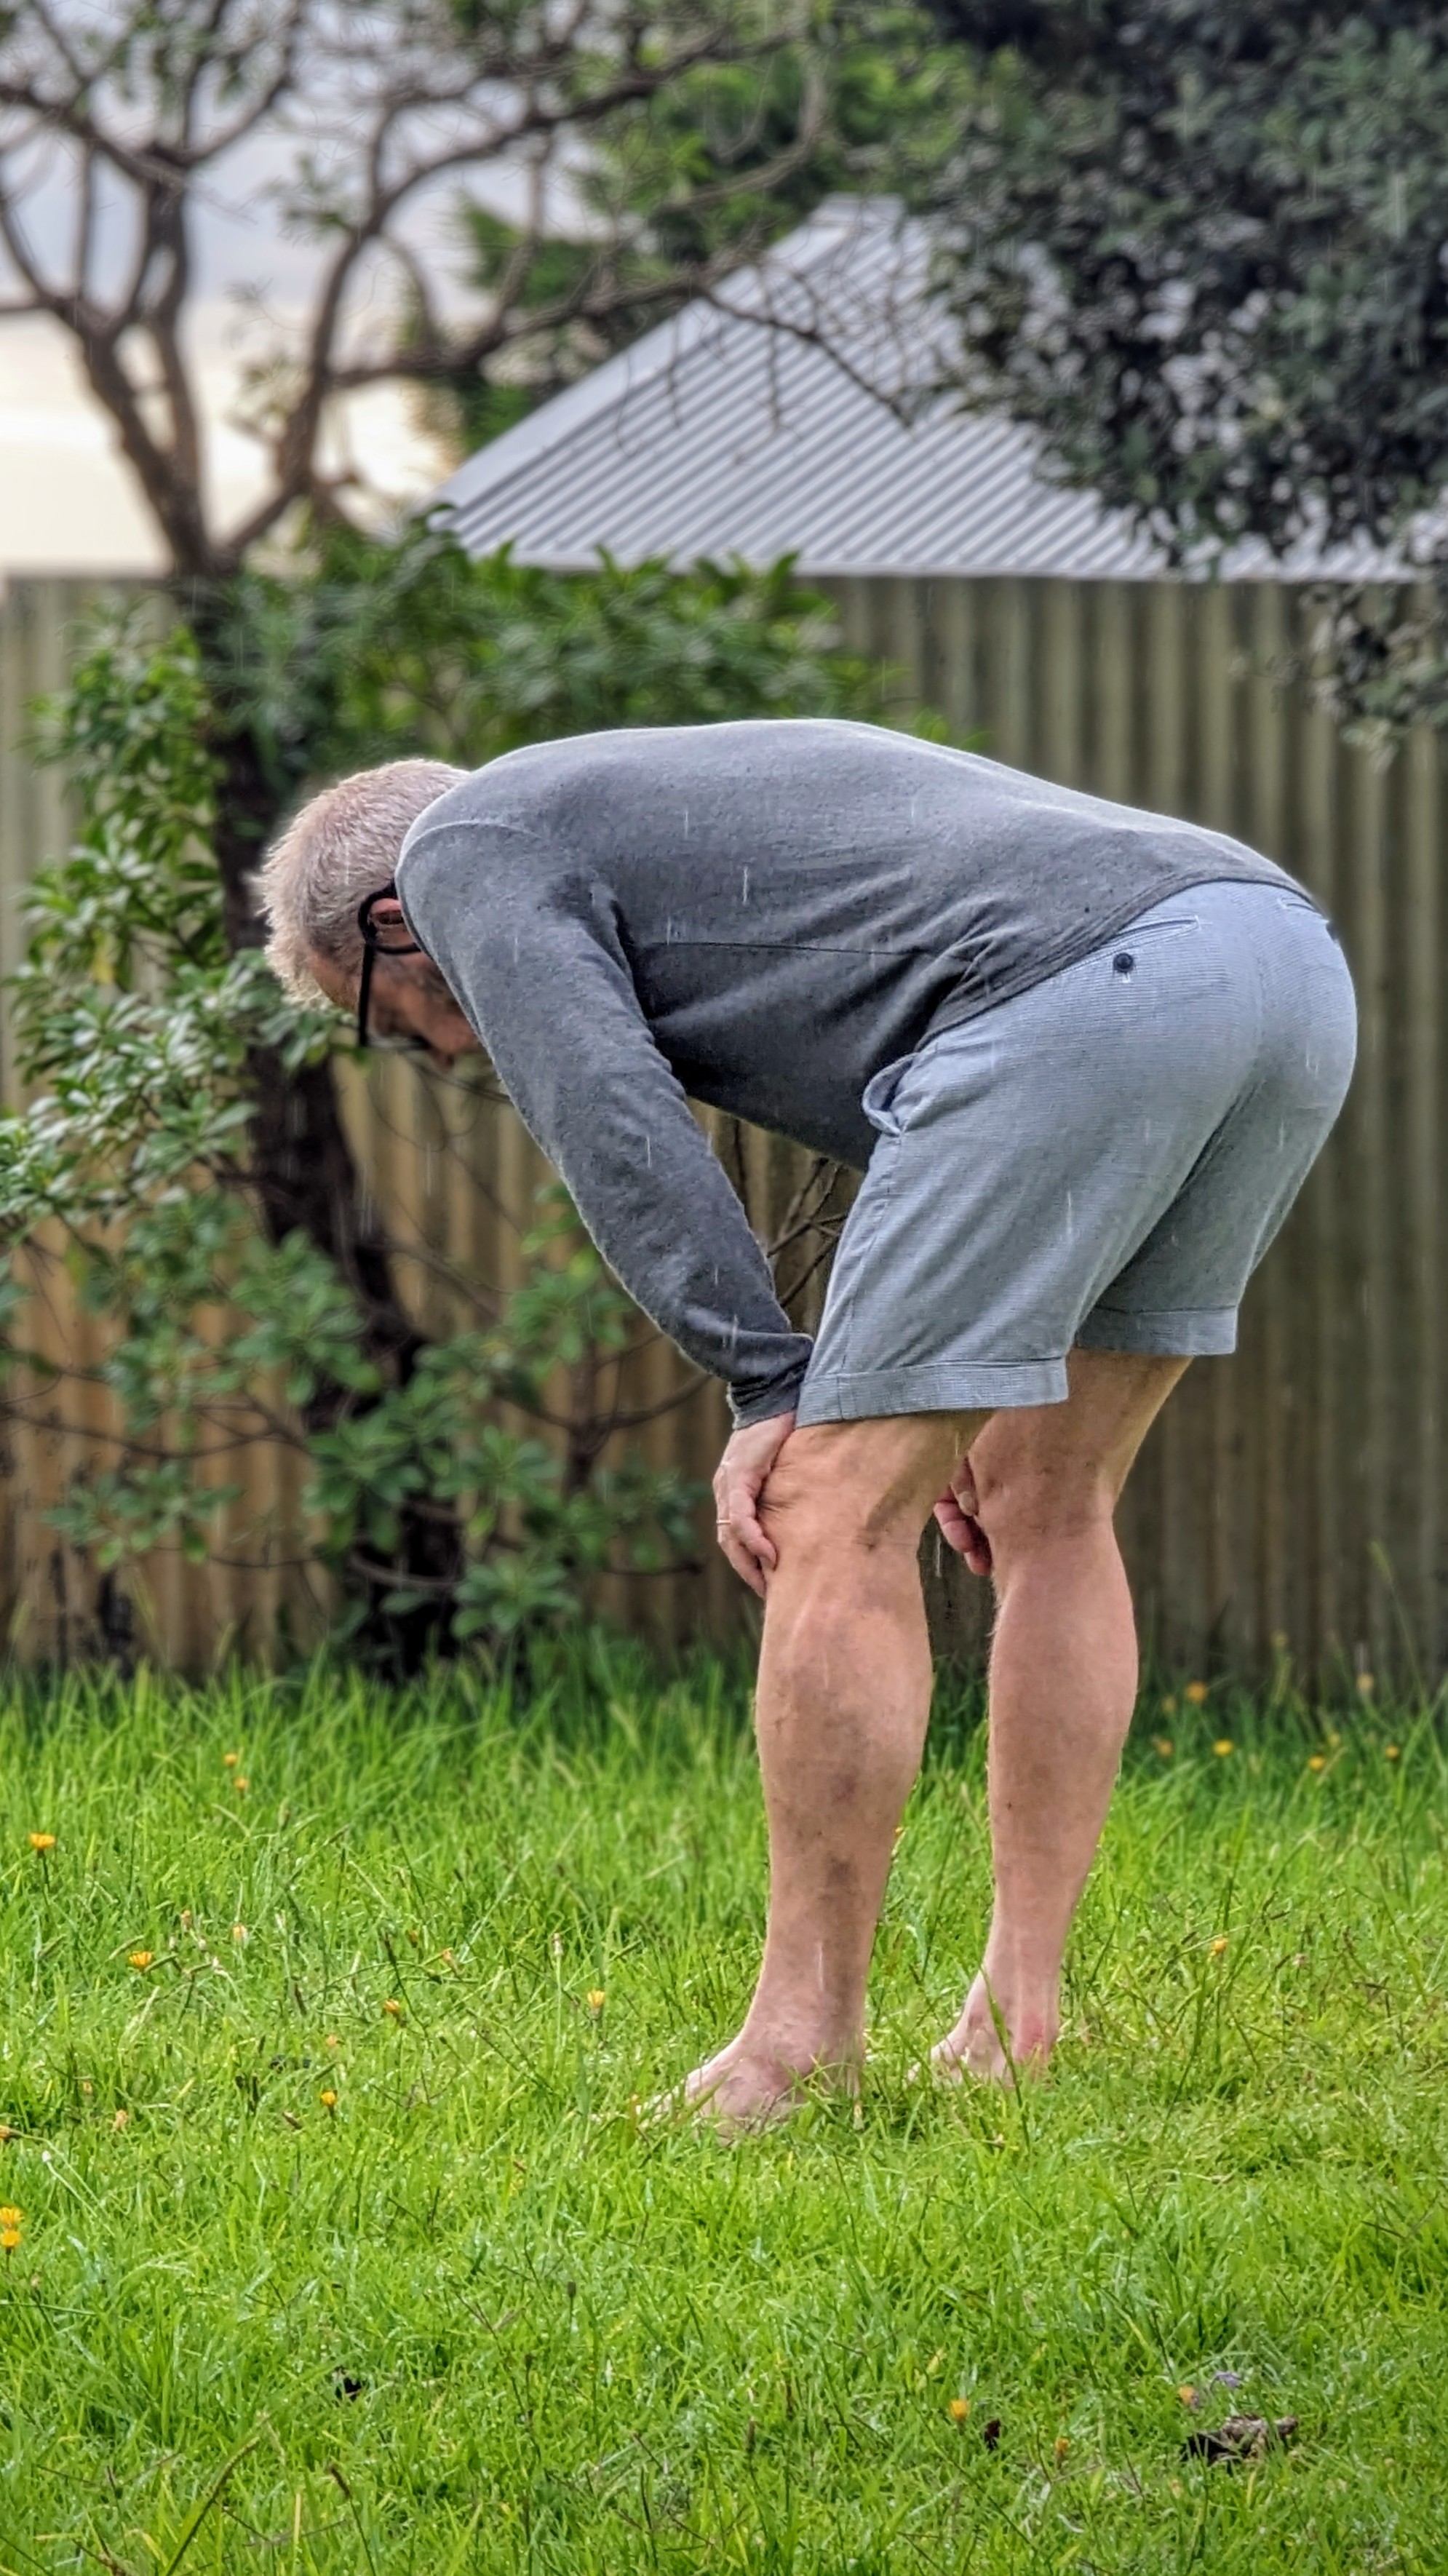 Bent over man on a lawn looking intently down